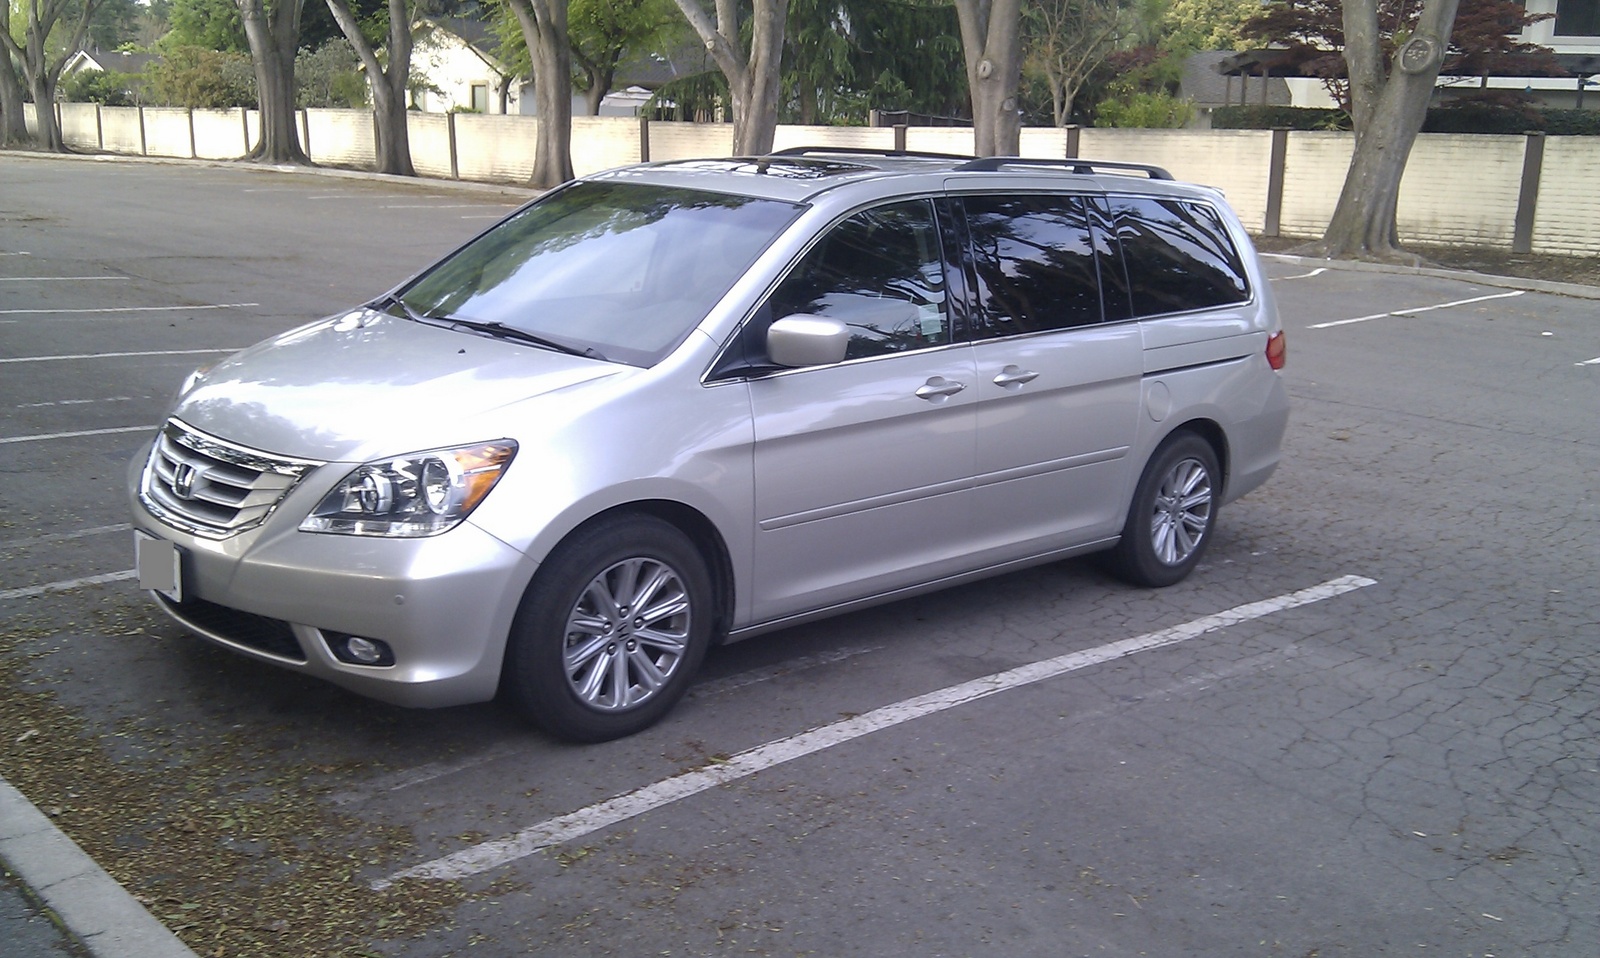 2009 Honda odyssey touring with pax